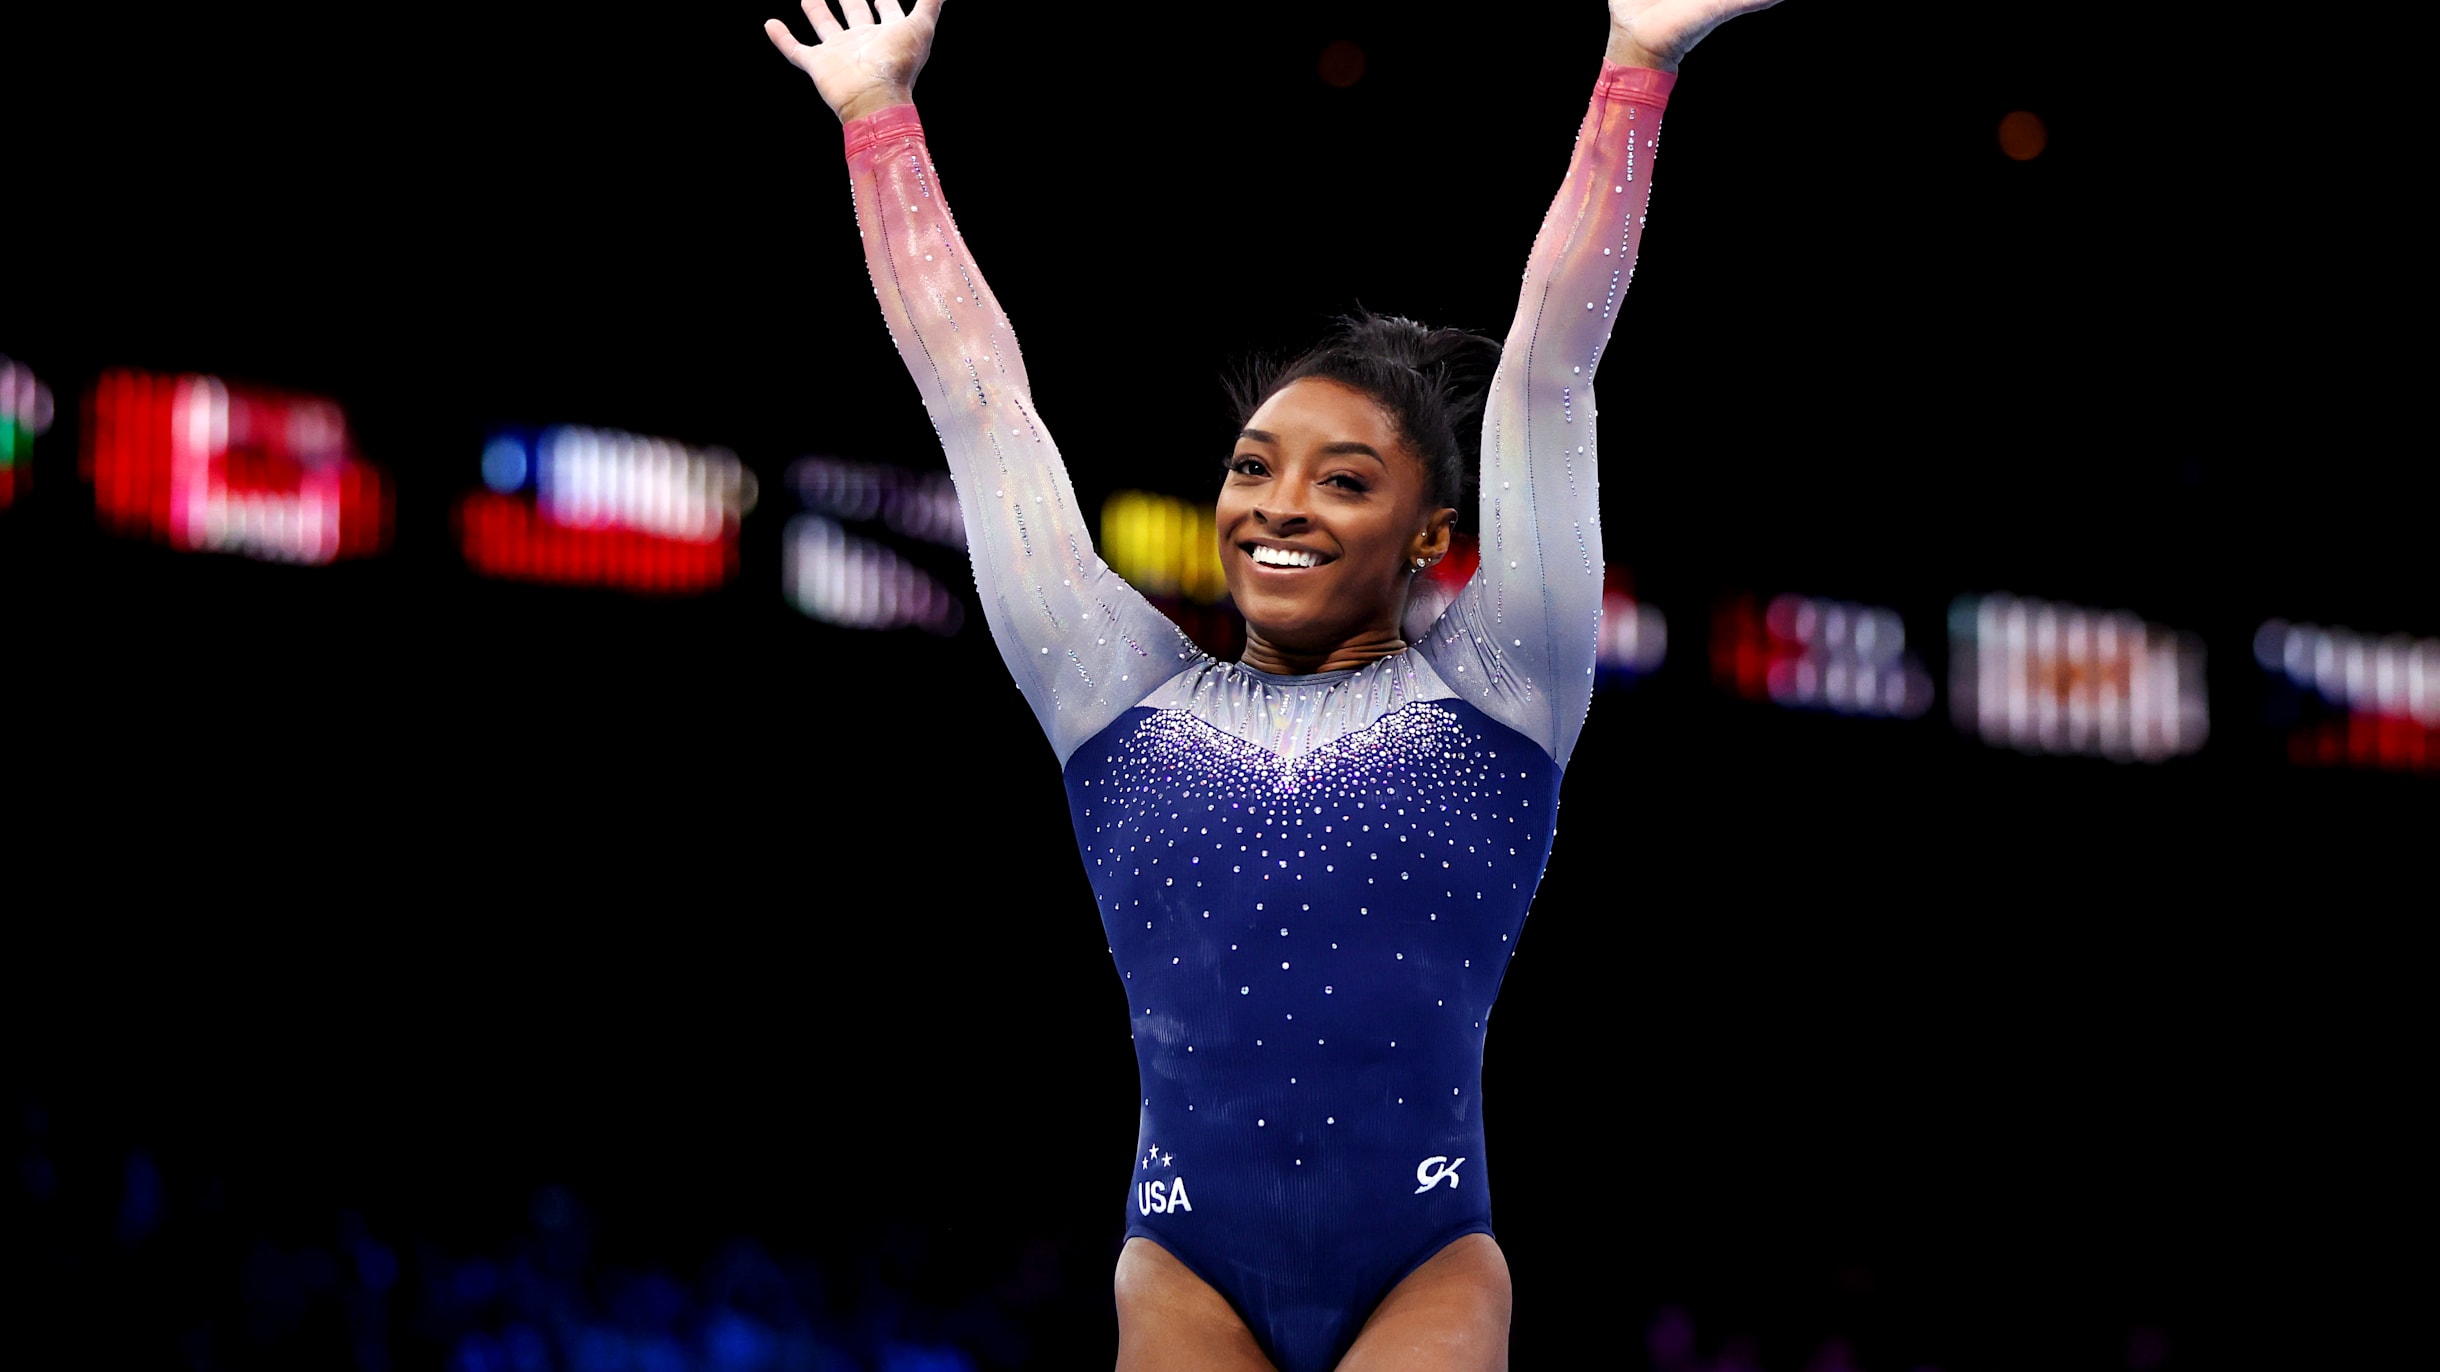 How this historically black college gymnastics team made history